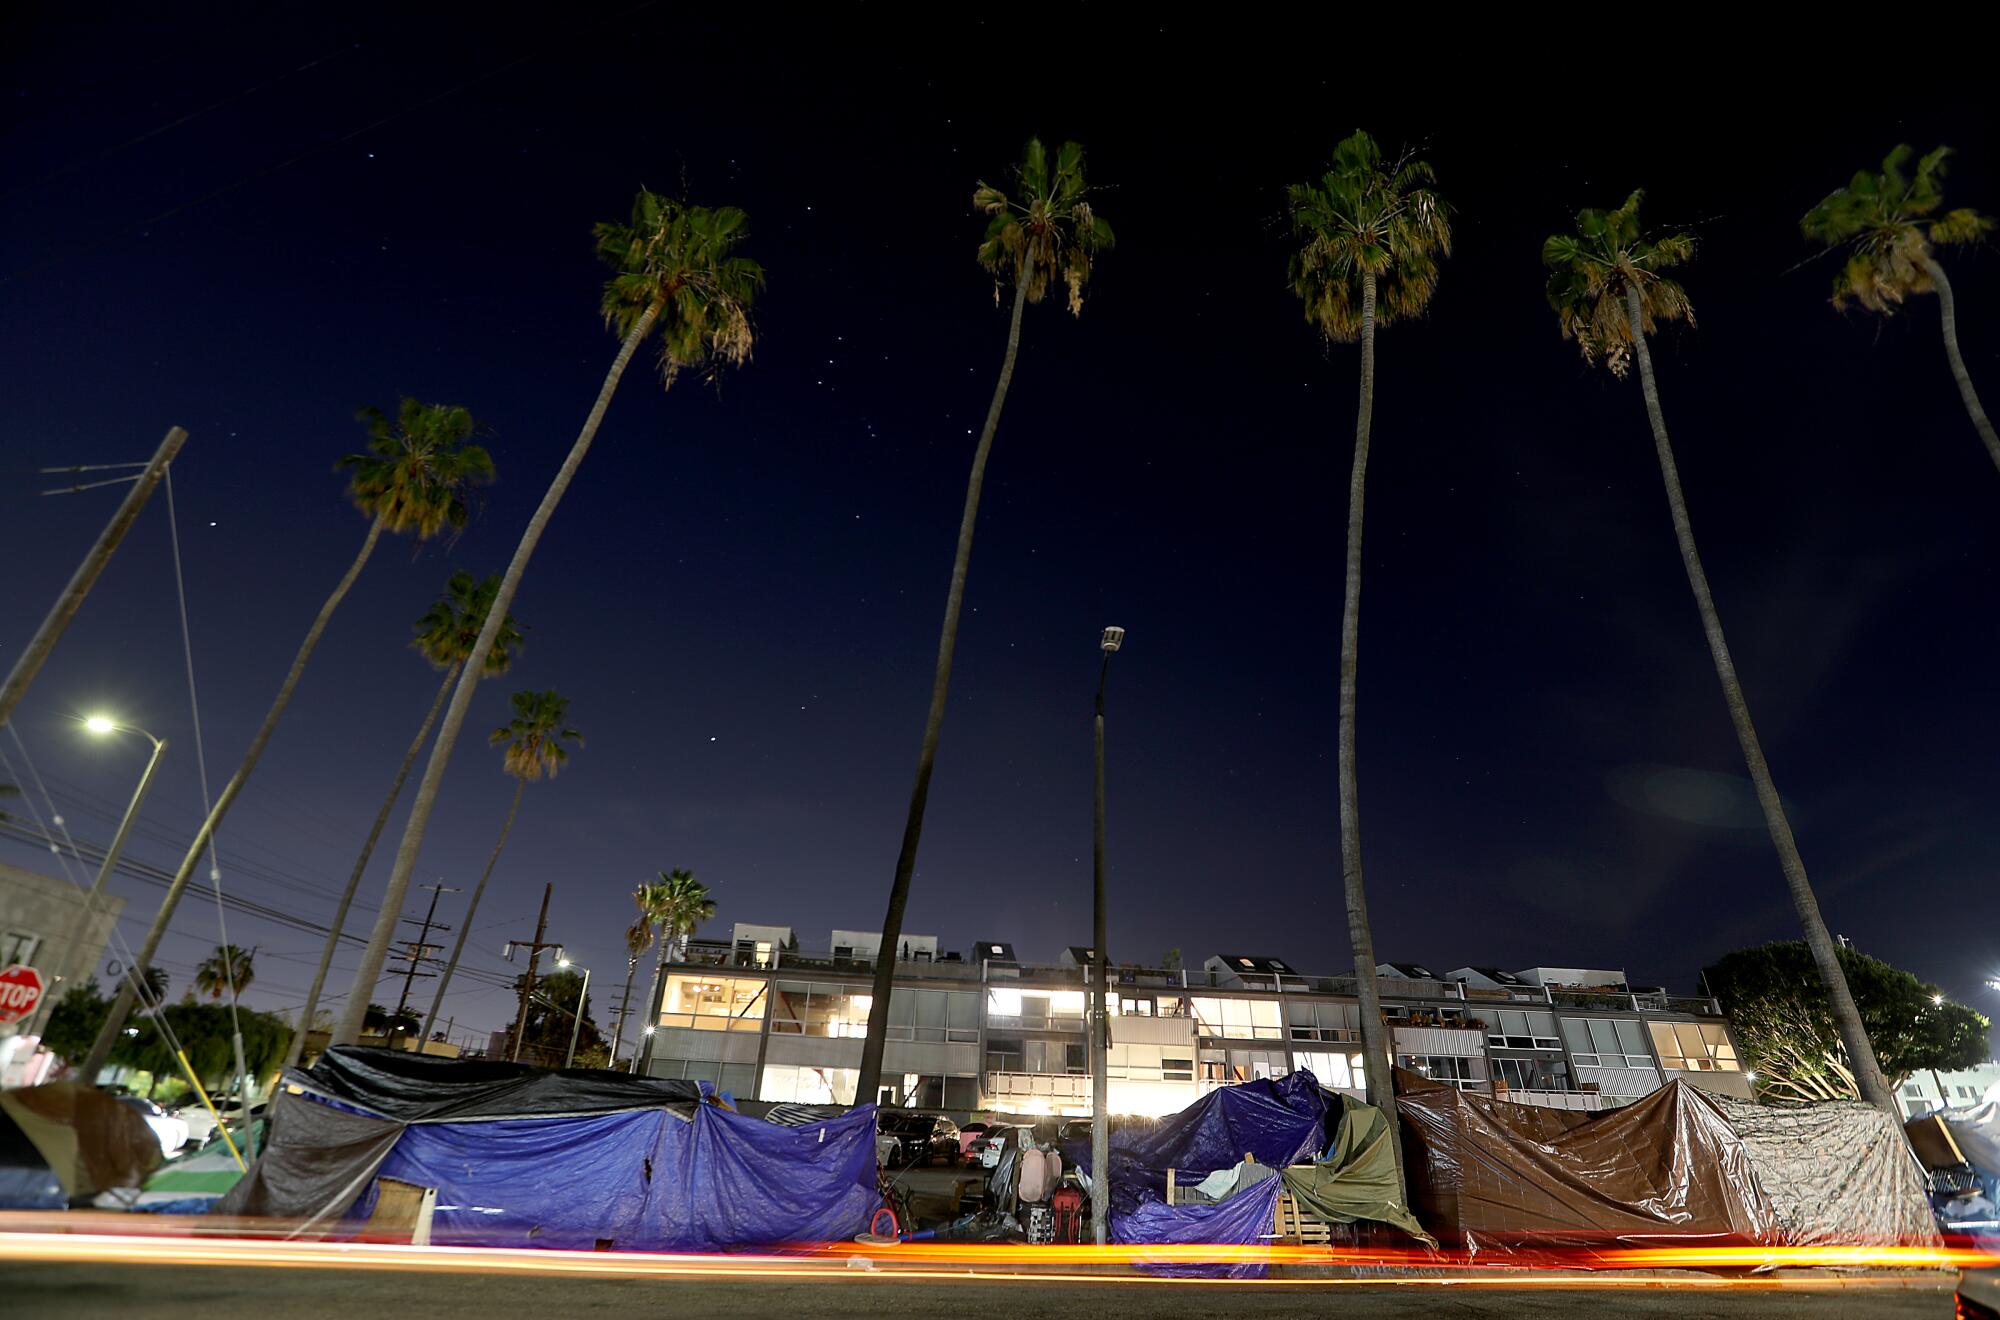 A view of tents amid towering palm trees at night.